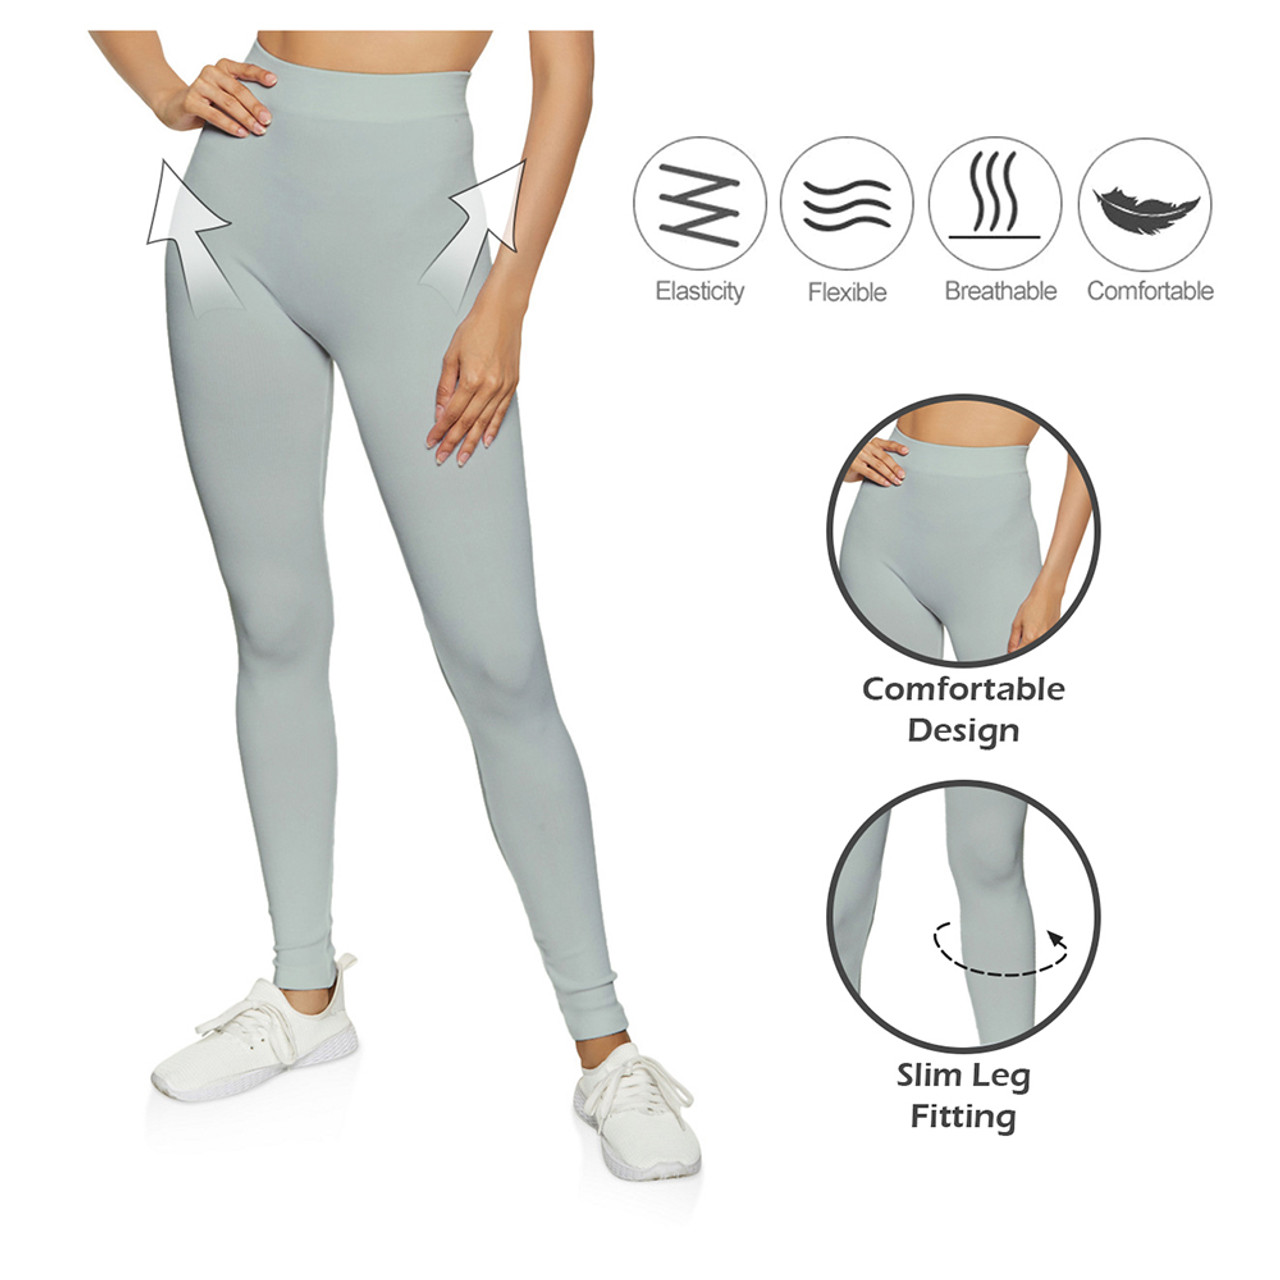 Women's High Waisted Tummy Control Seamless Leggings (2-Pack) product image